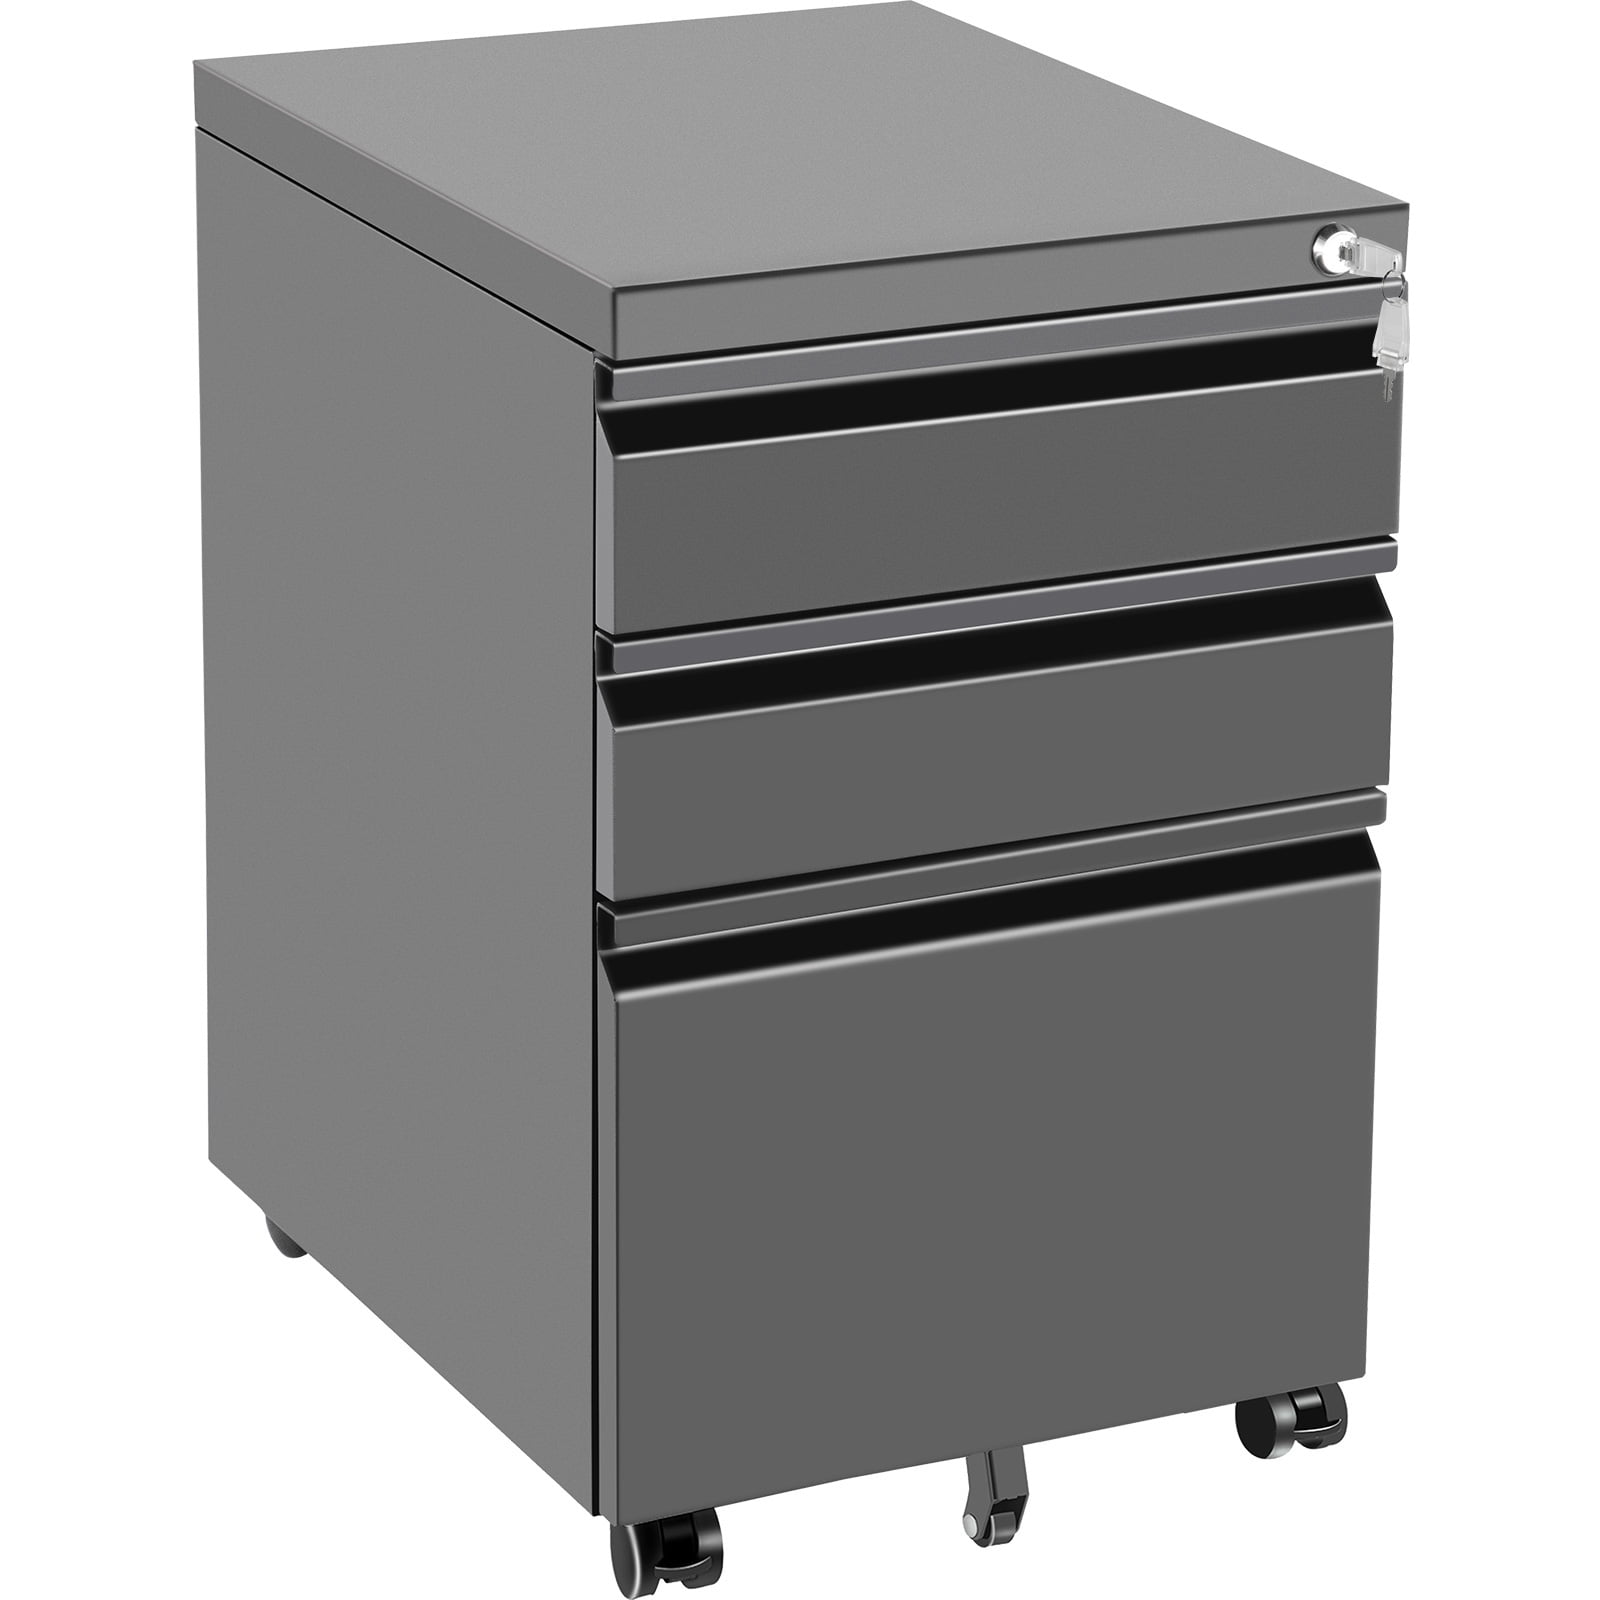 Charcoal Metal Filling Vertical Cabinets A4/Letter Size for Home Office Fully Assembled 3 Drawer File Cabinet with Lock